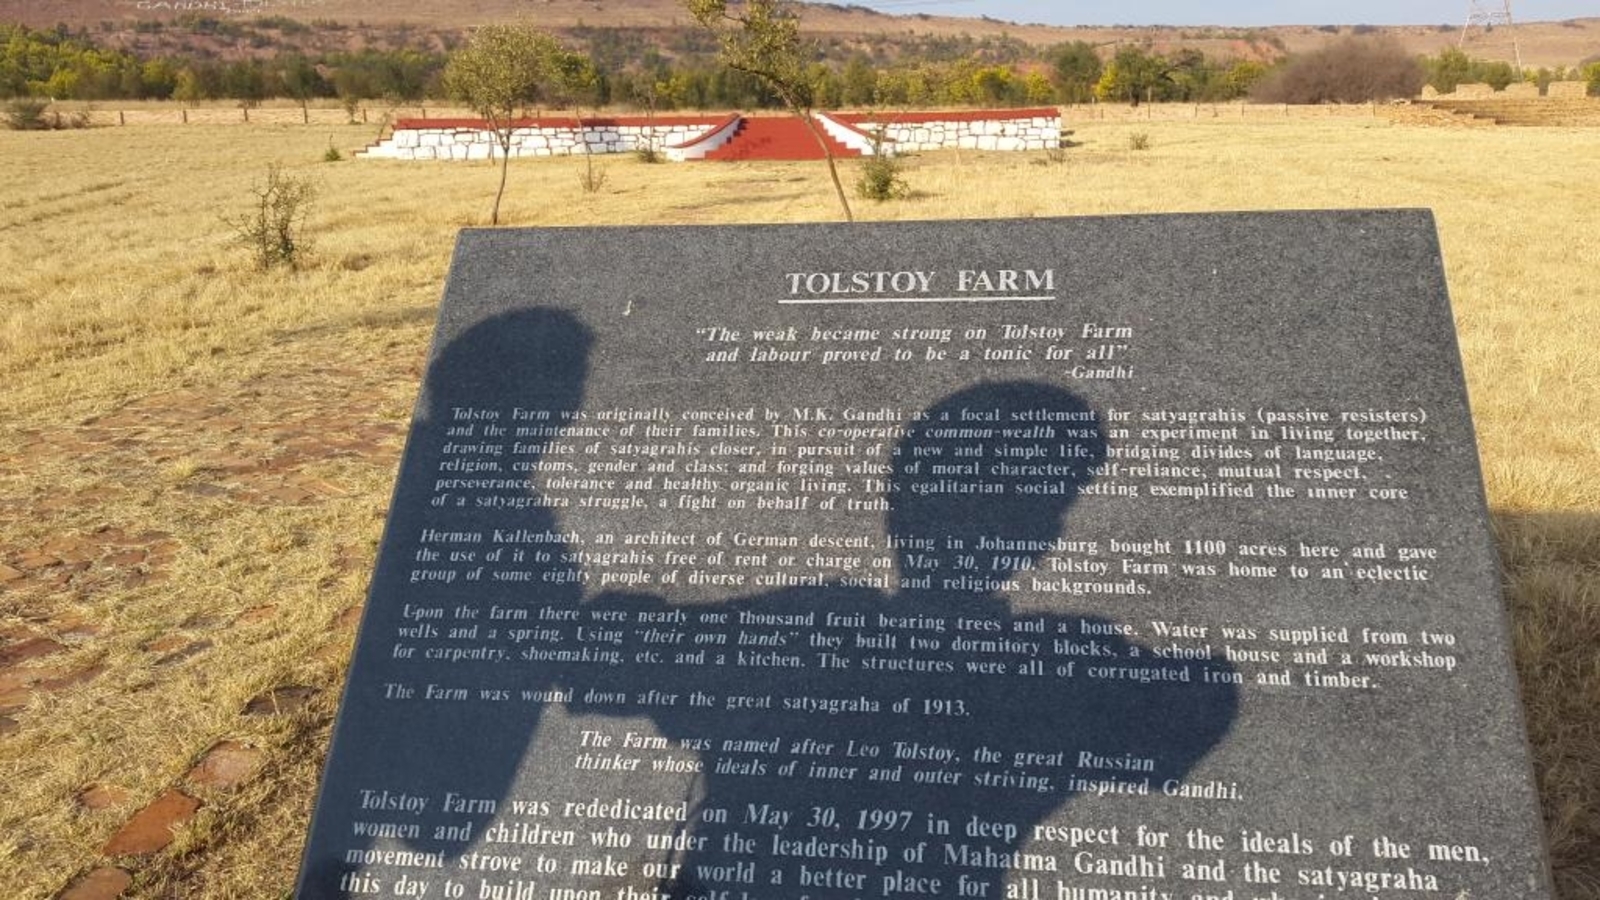 mahatma-gandhi-s-tolstoy-farm-in-south-africa-continues-to-see-revival-efforts